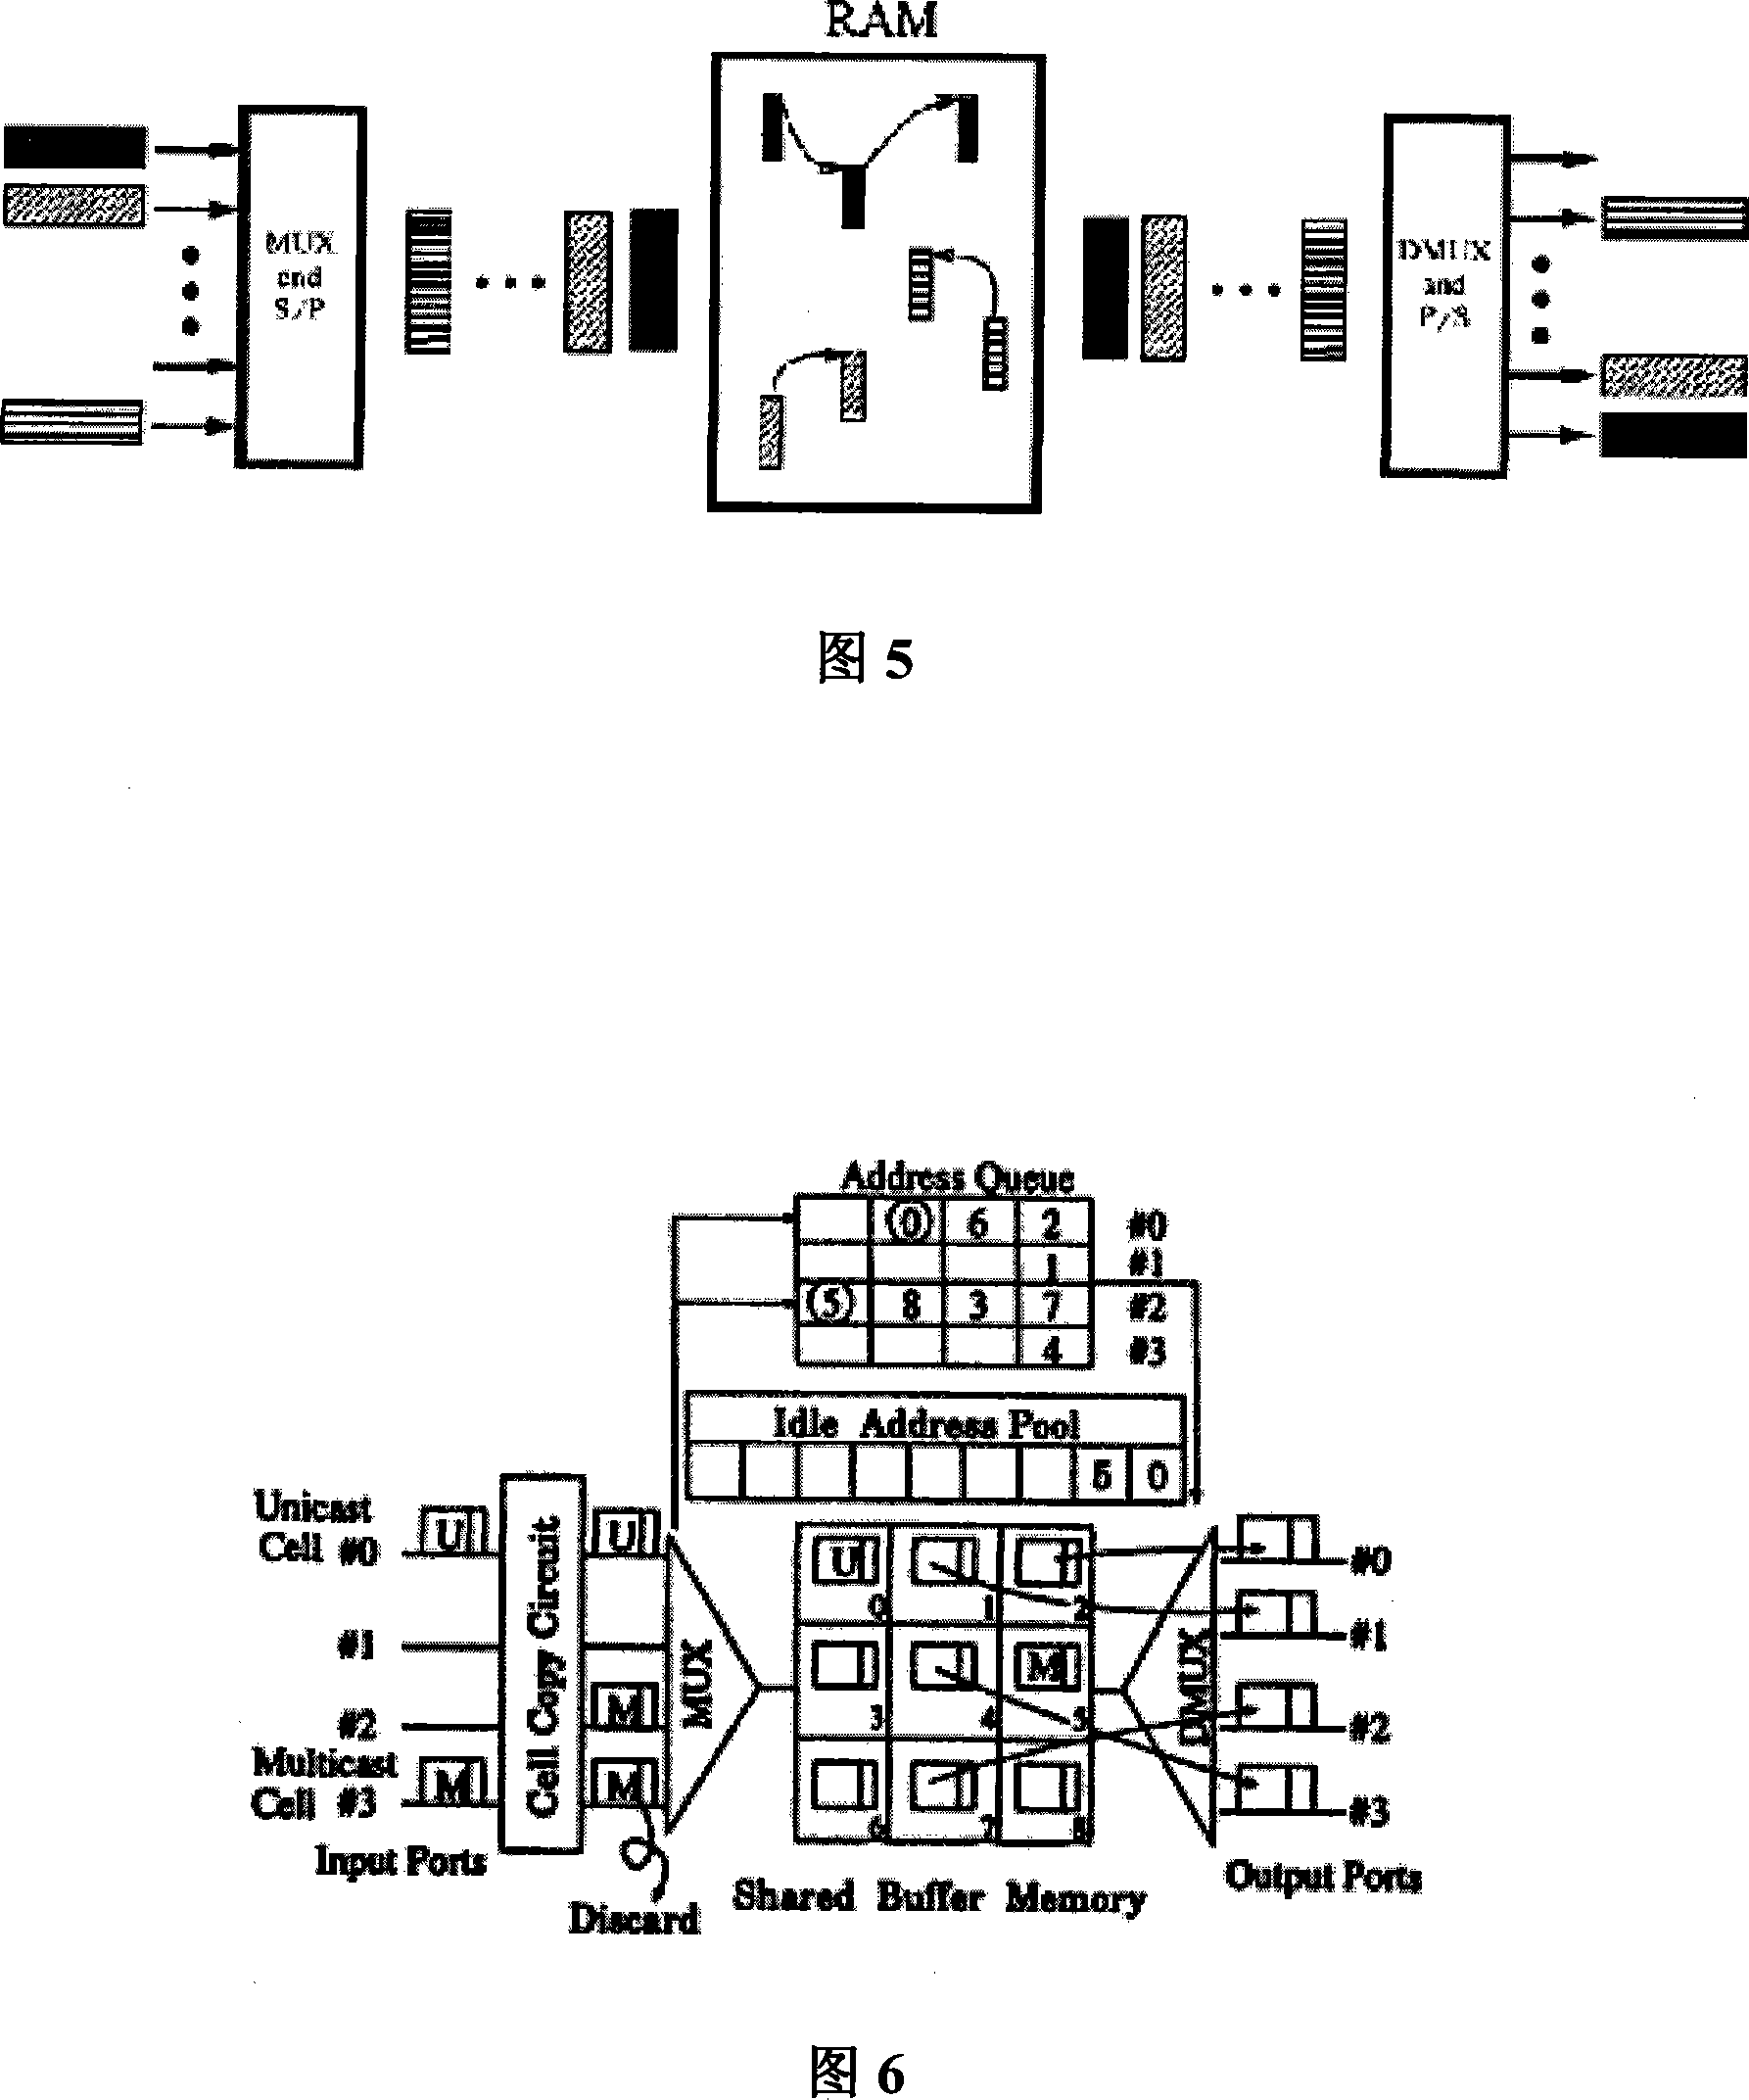 Efficient multicast forward method based on sliding window in share memory switching structure